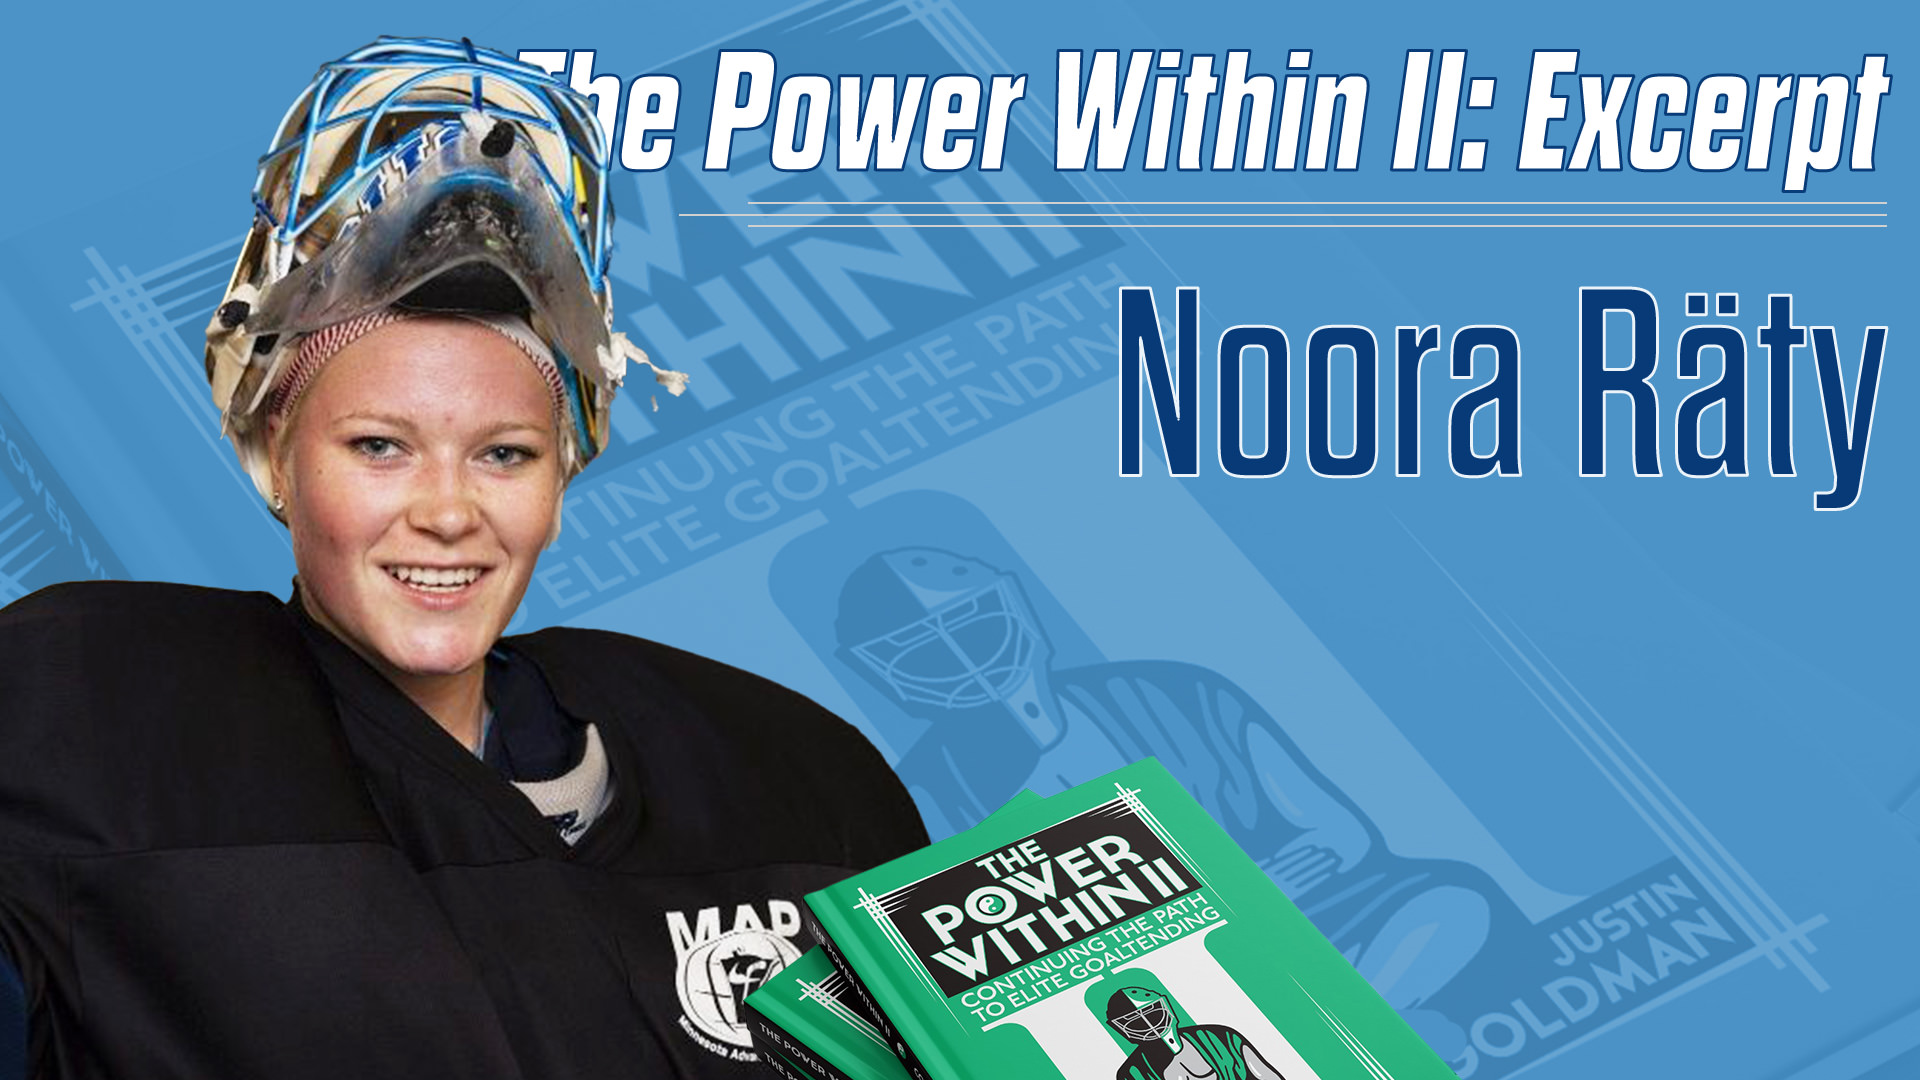 Power Within II Excerpt: Noora Räty on her Mental Approach and Advice on Overcoming Adversity,